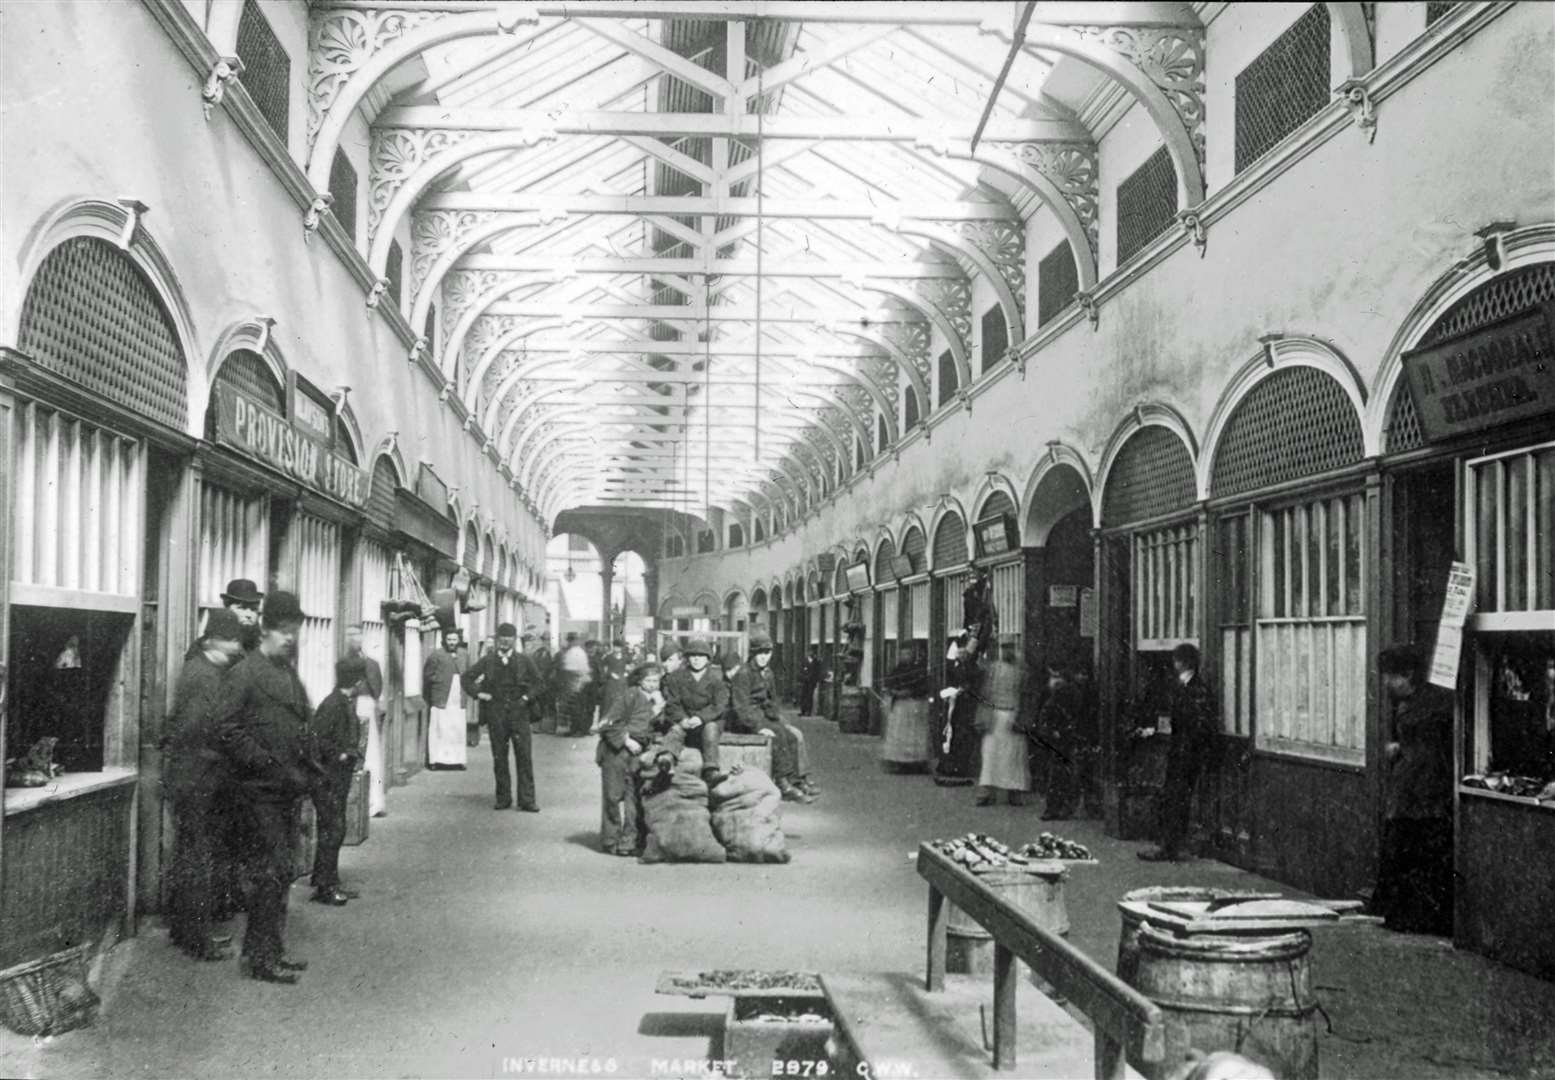 The Victorian Market in the 1870s. Picture: Joseph Cook Collection, Inverness Museum and Art Gallery